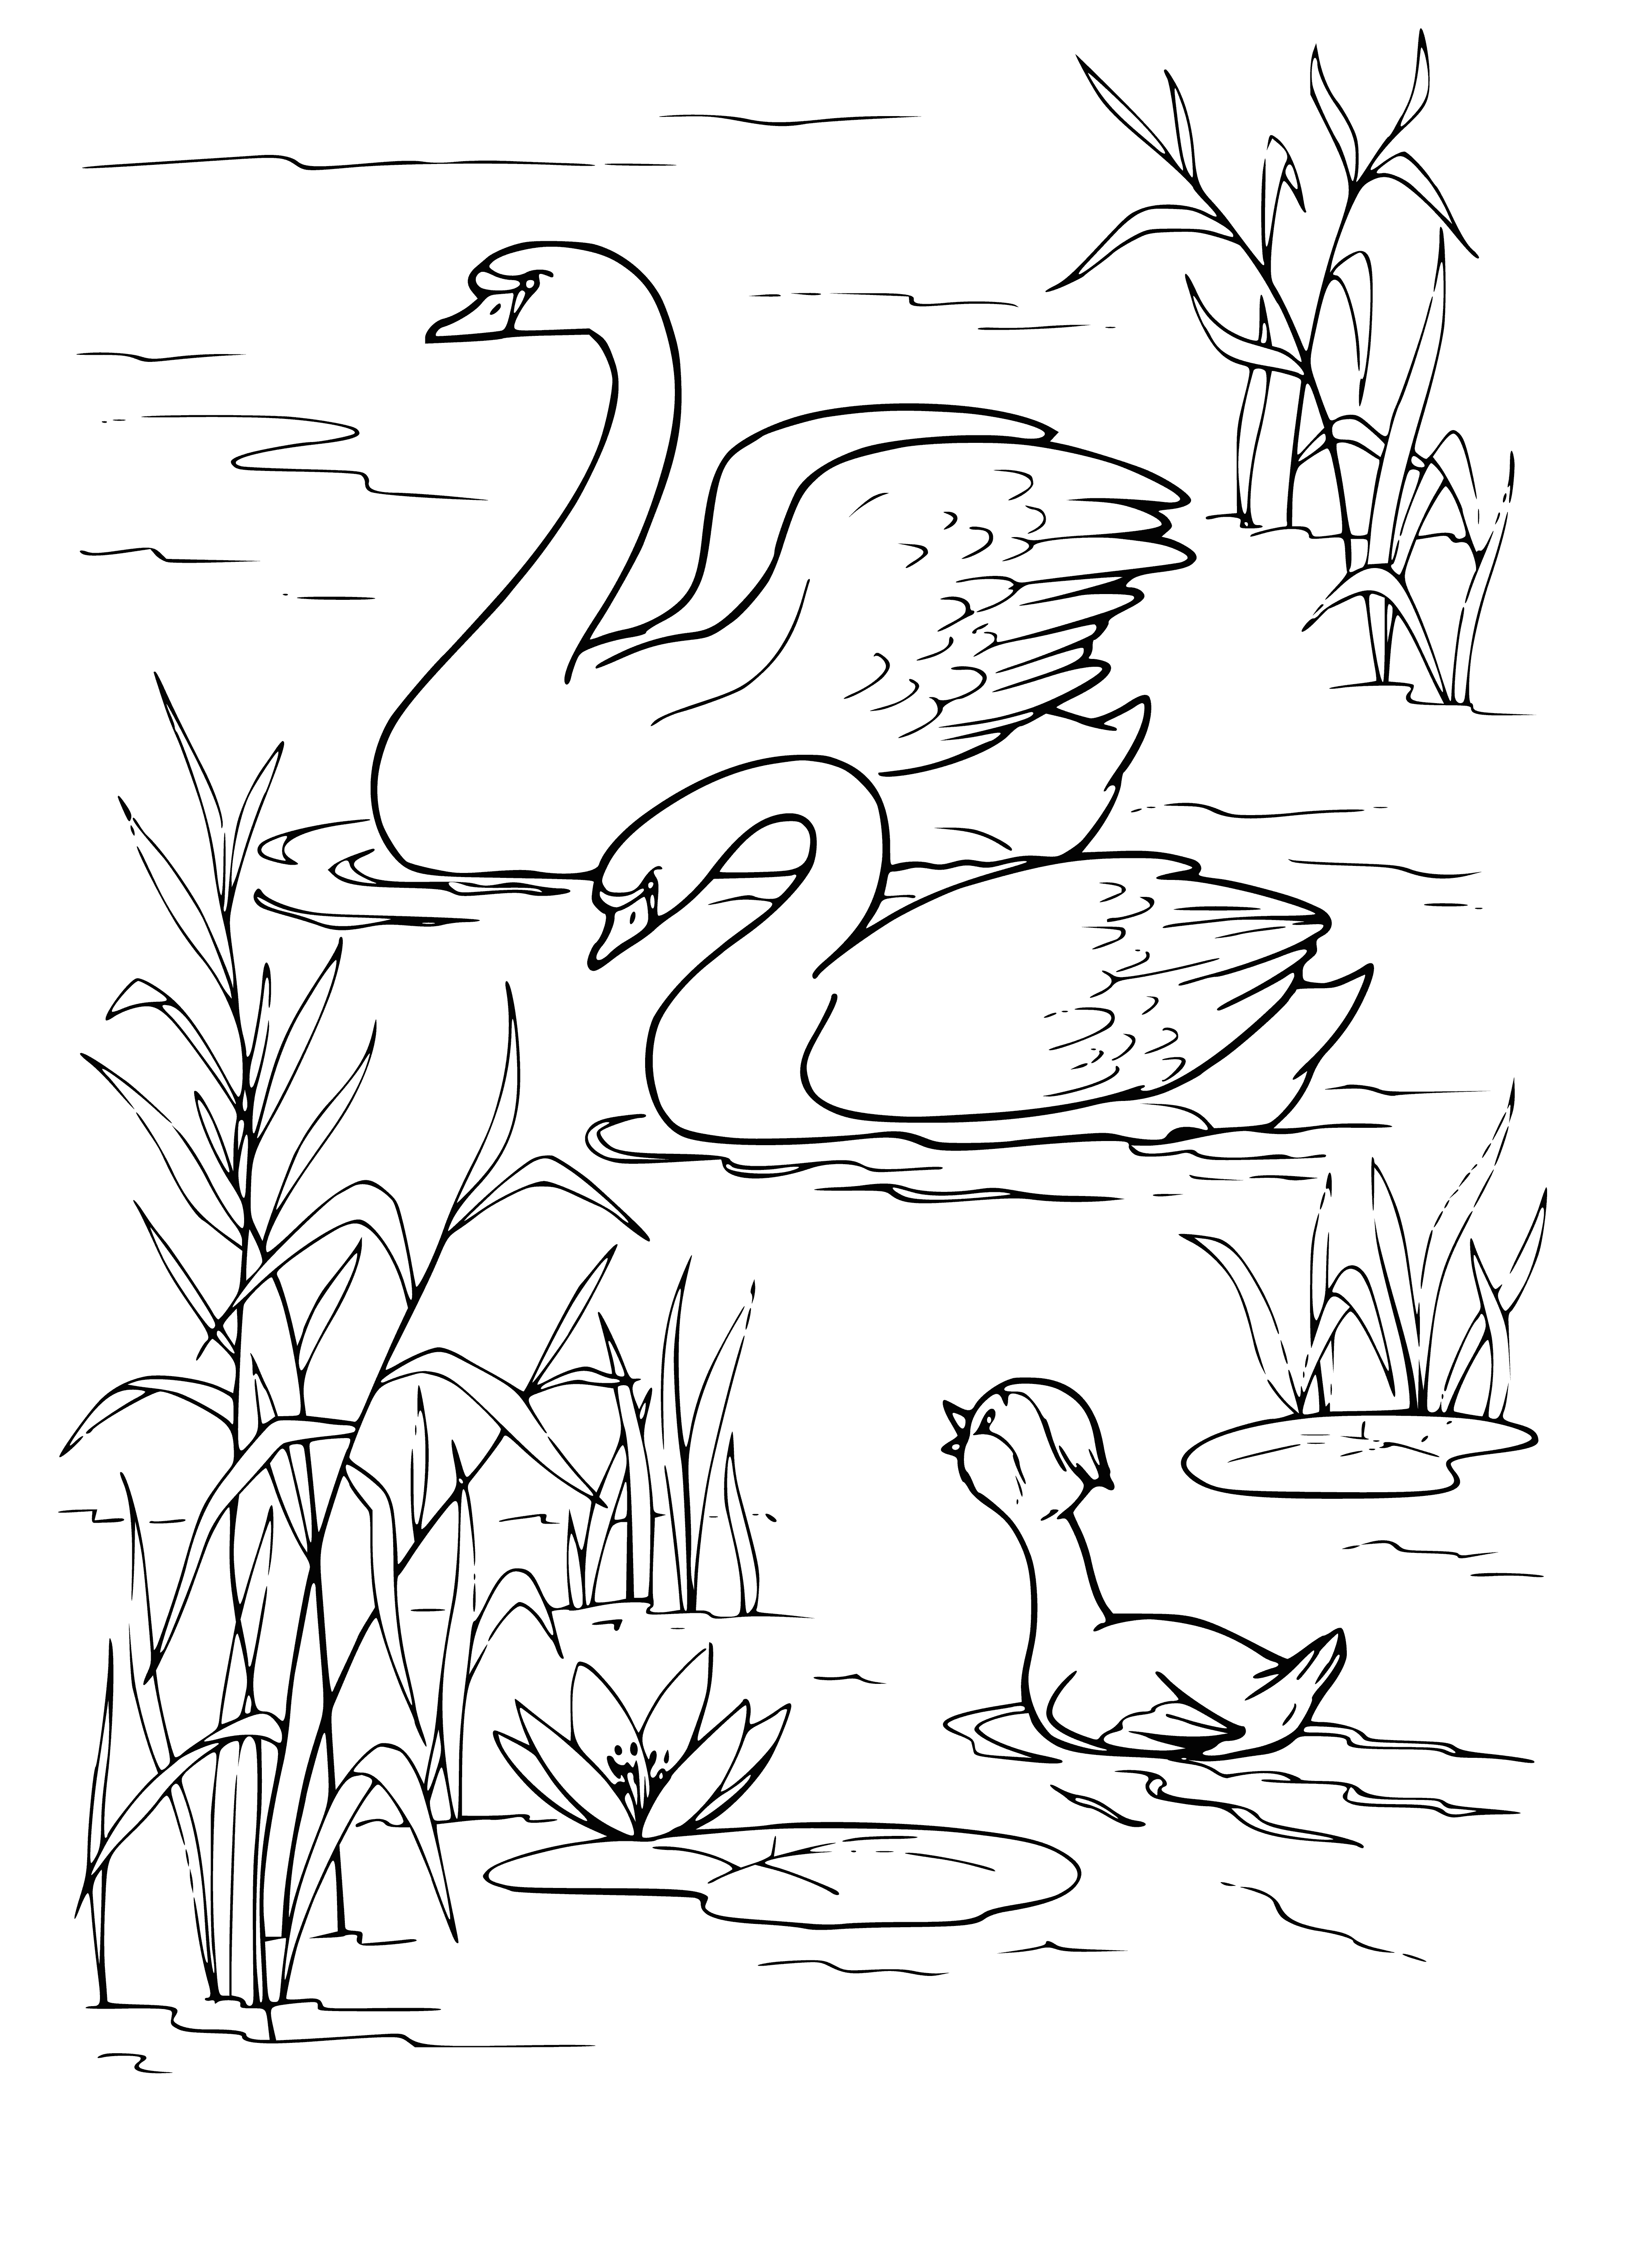 The duckling sees swans coloring page